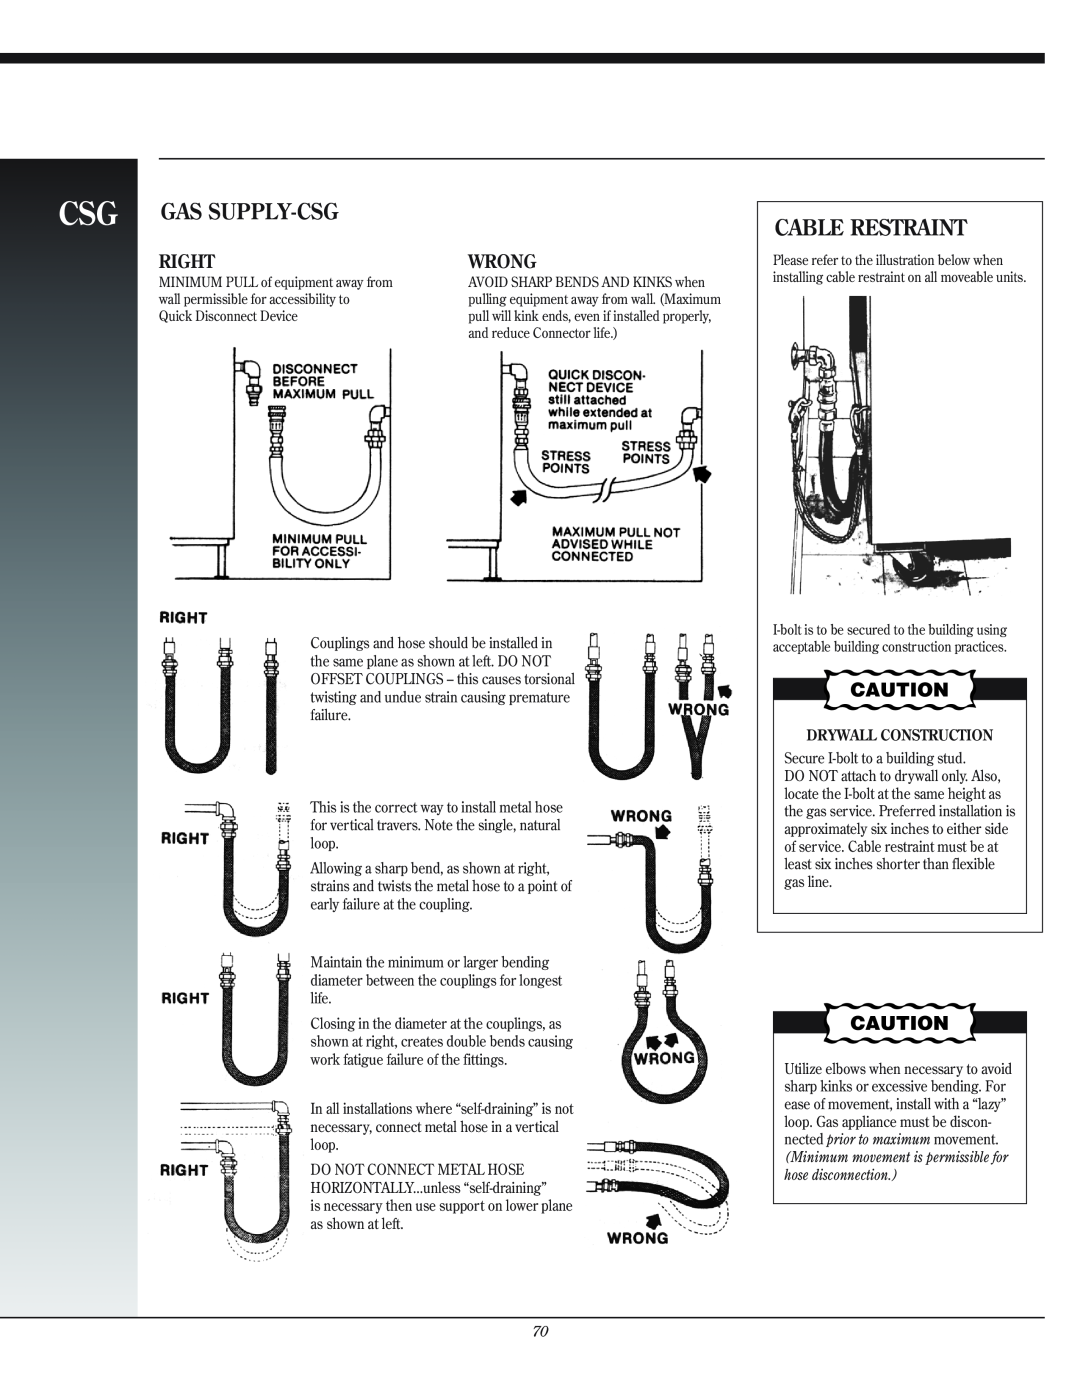 Henny Penny CSB, CSL, CSM installation instructions Cable Restraint, Right, Wrong, Gas Supply-Csg, Drywall Construction 